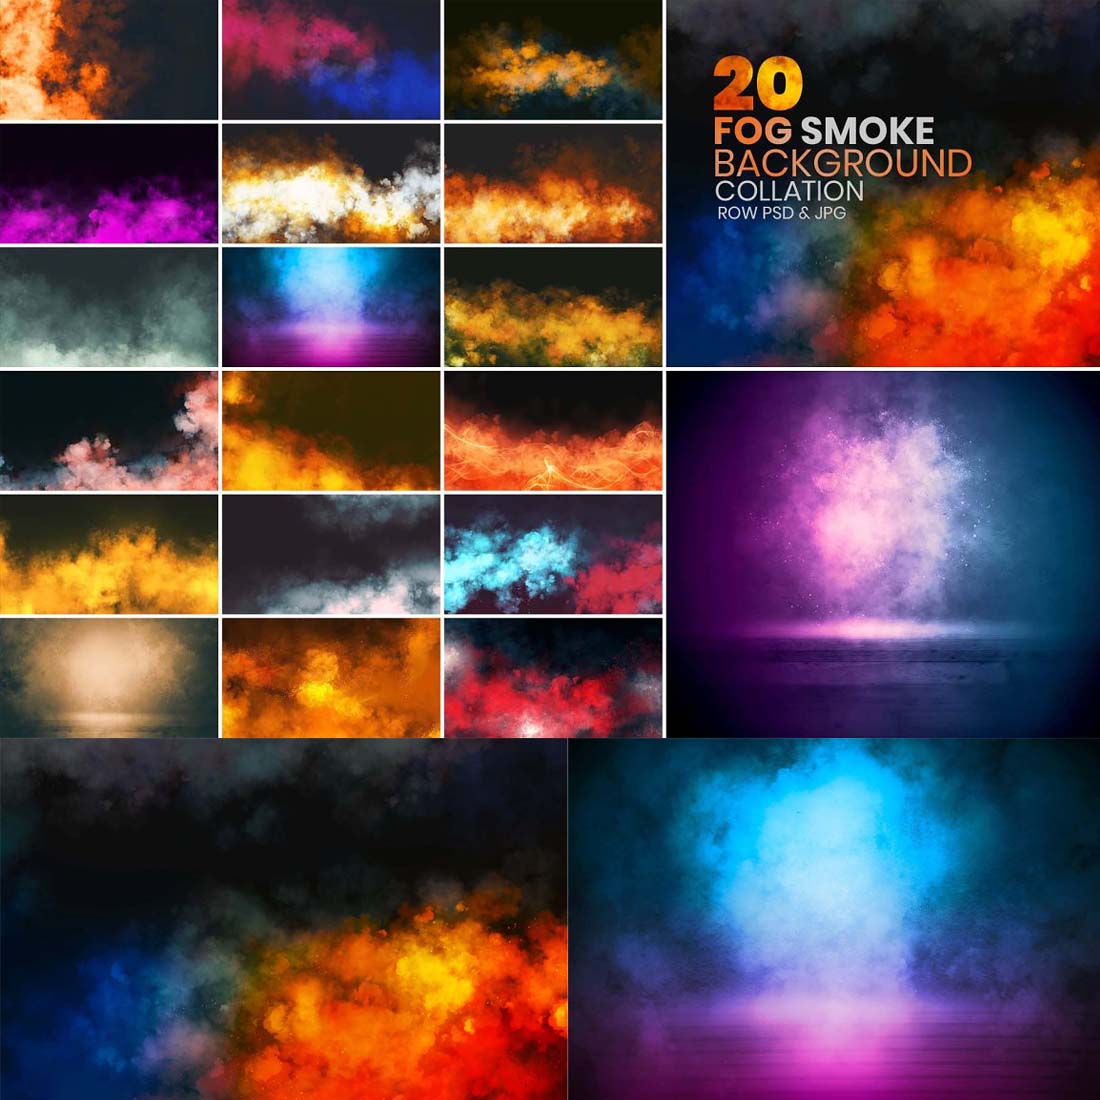 Fog Smoke Background Collation cover image.